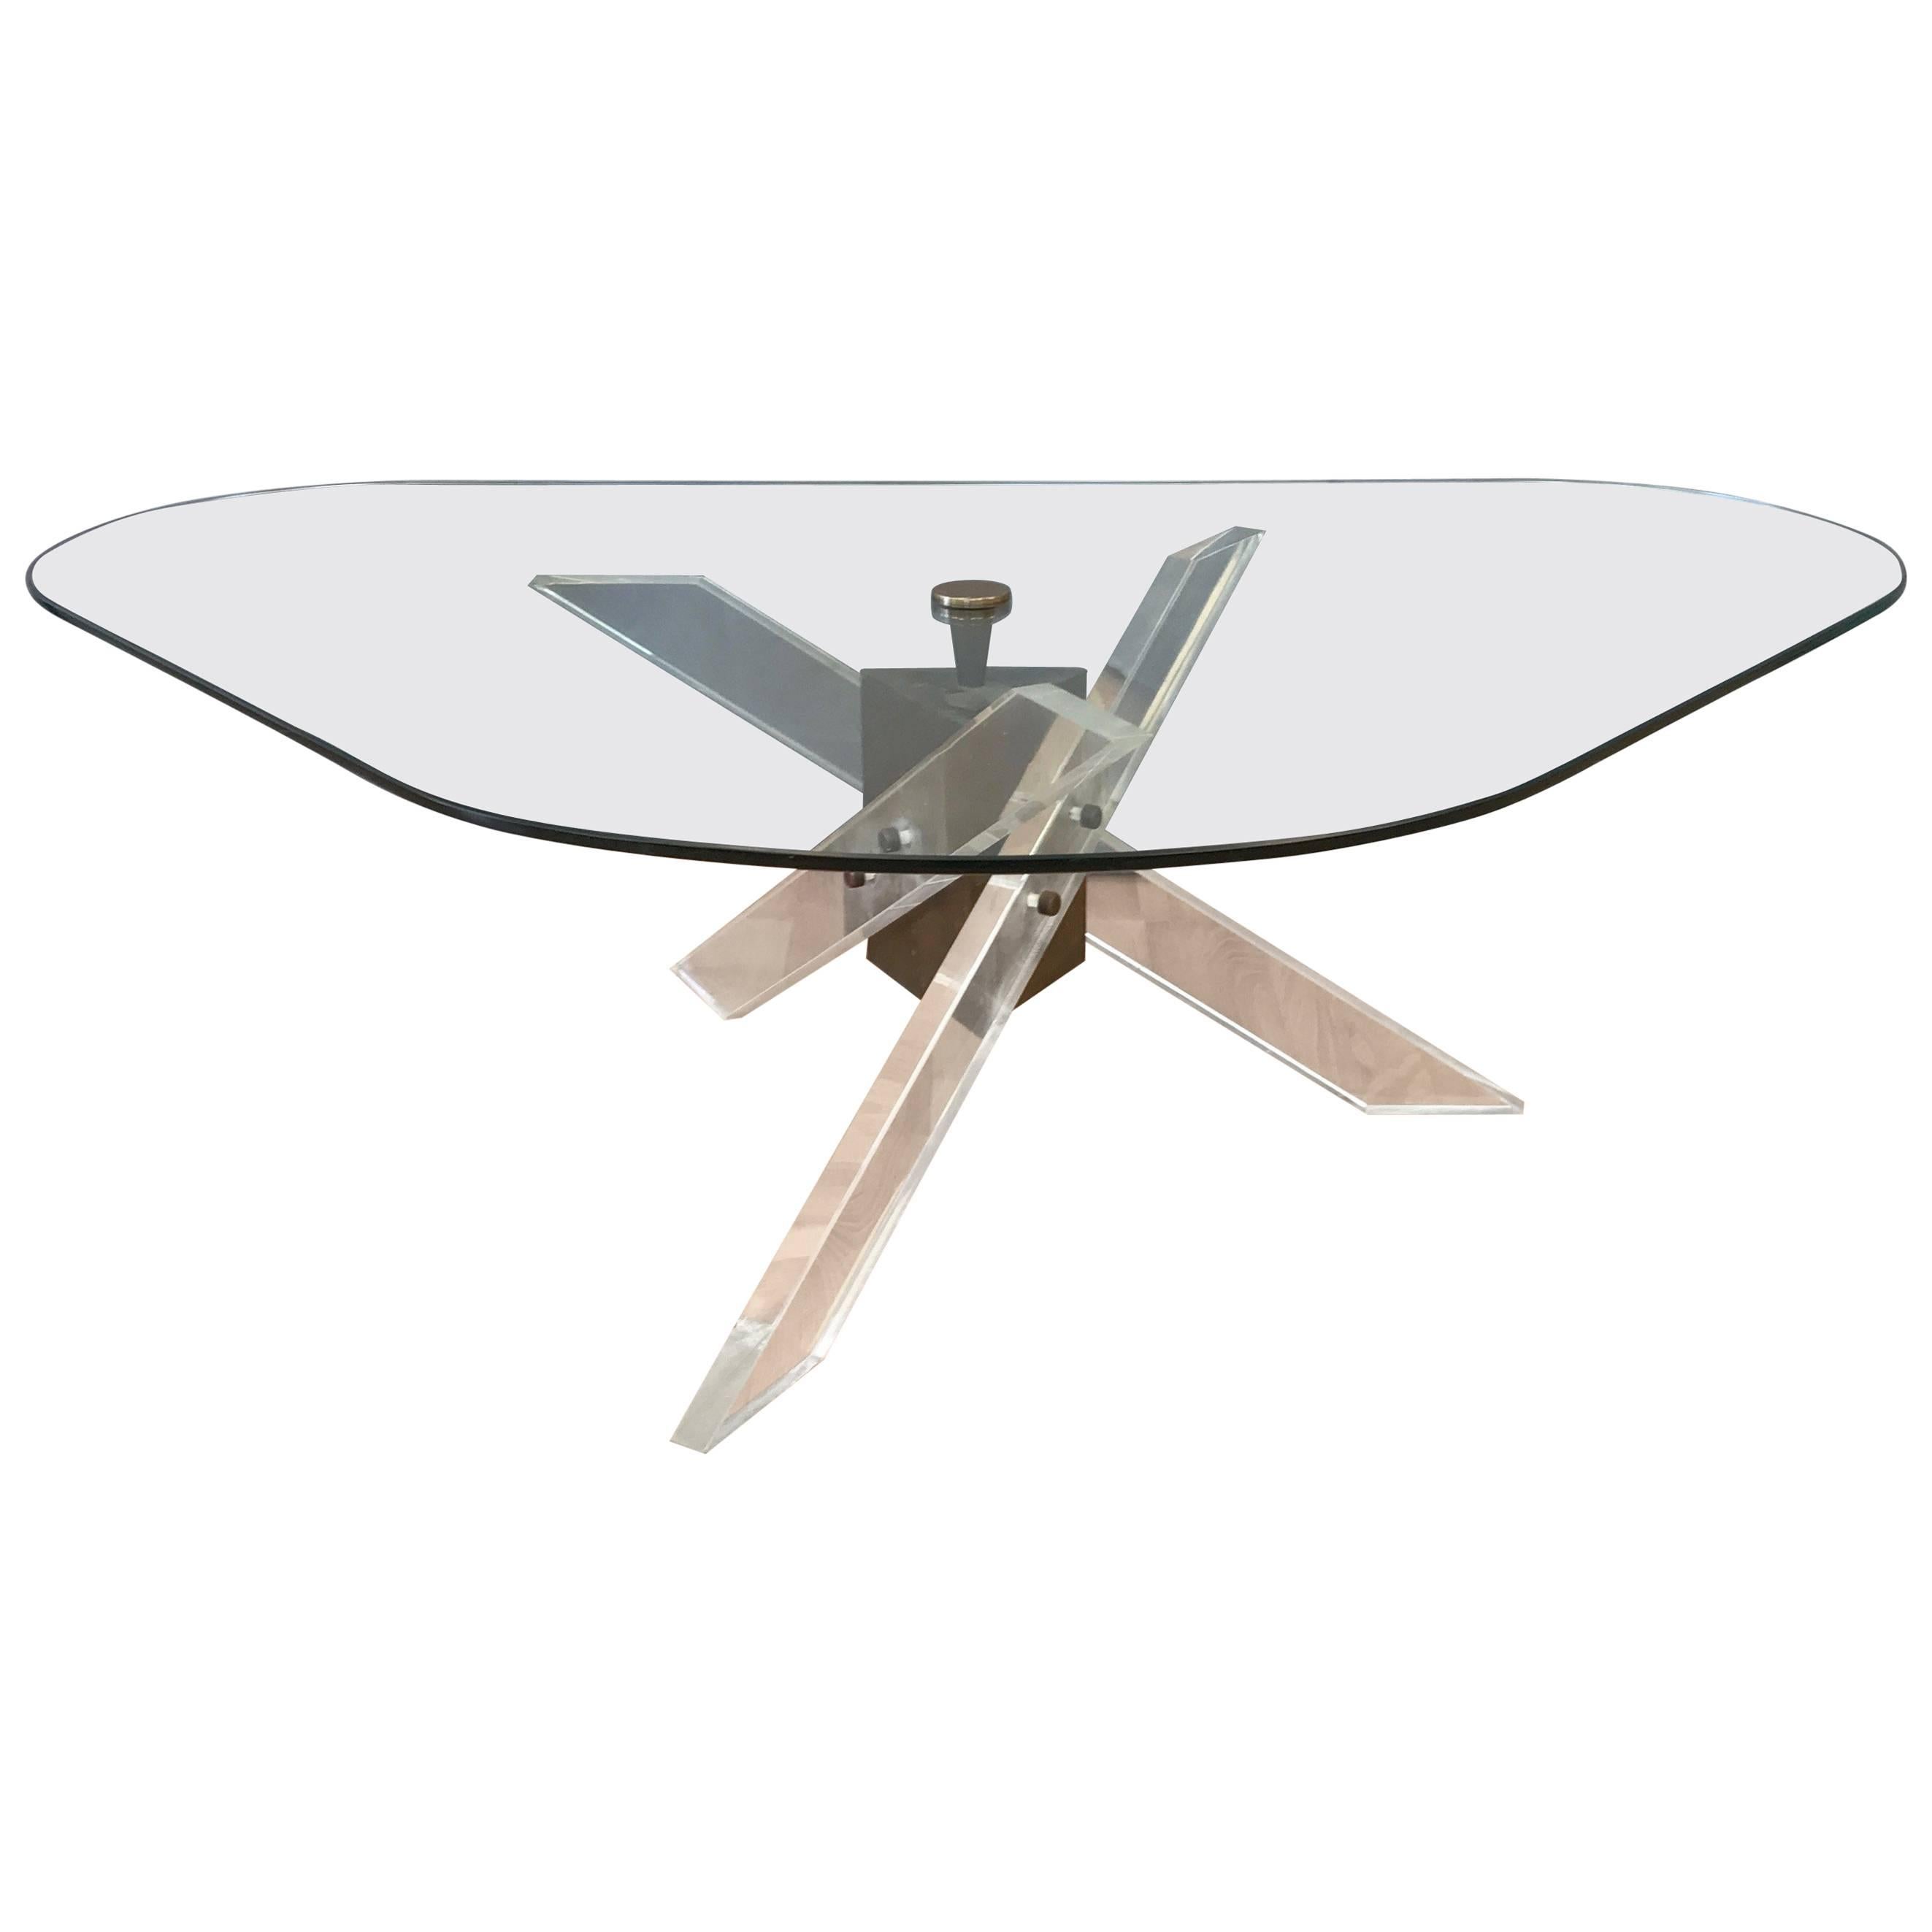 Architectural Lucite and Patinated Brass Tripod Base Coffee Table